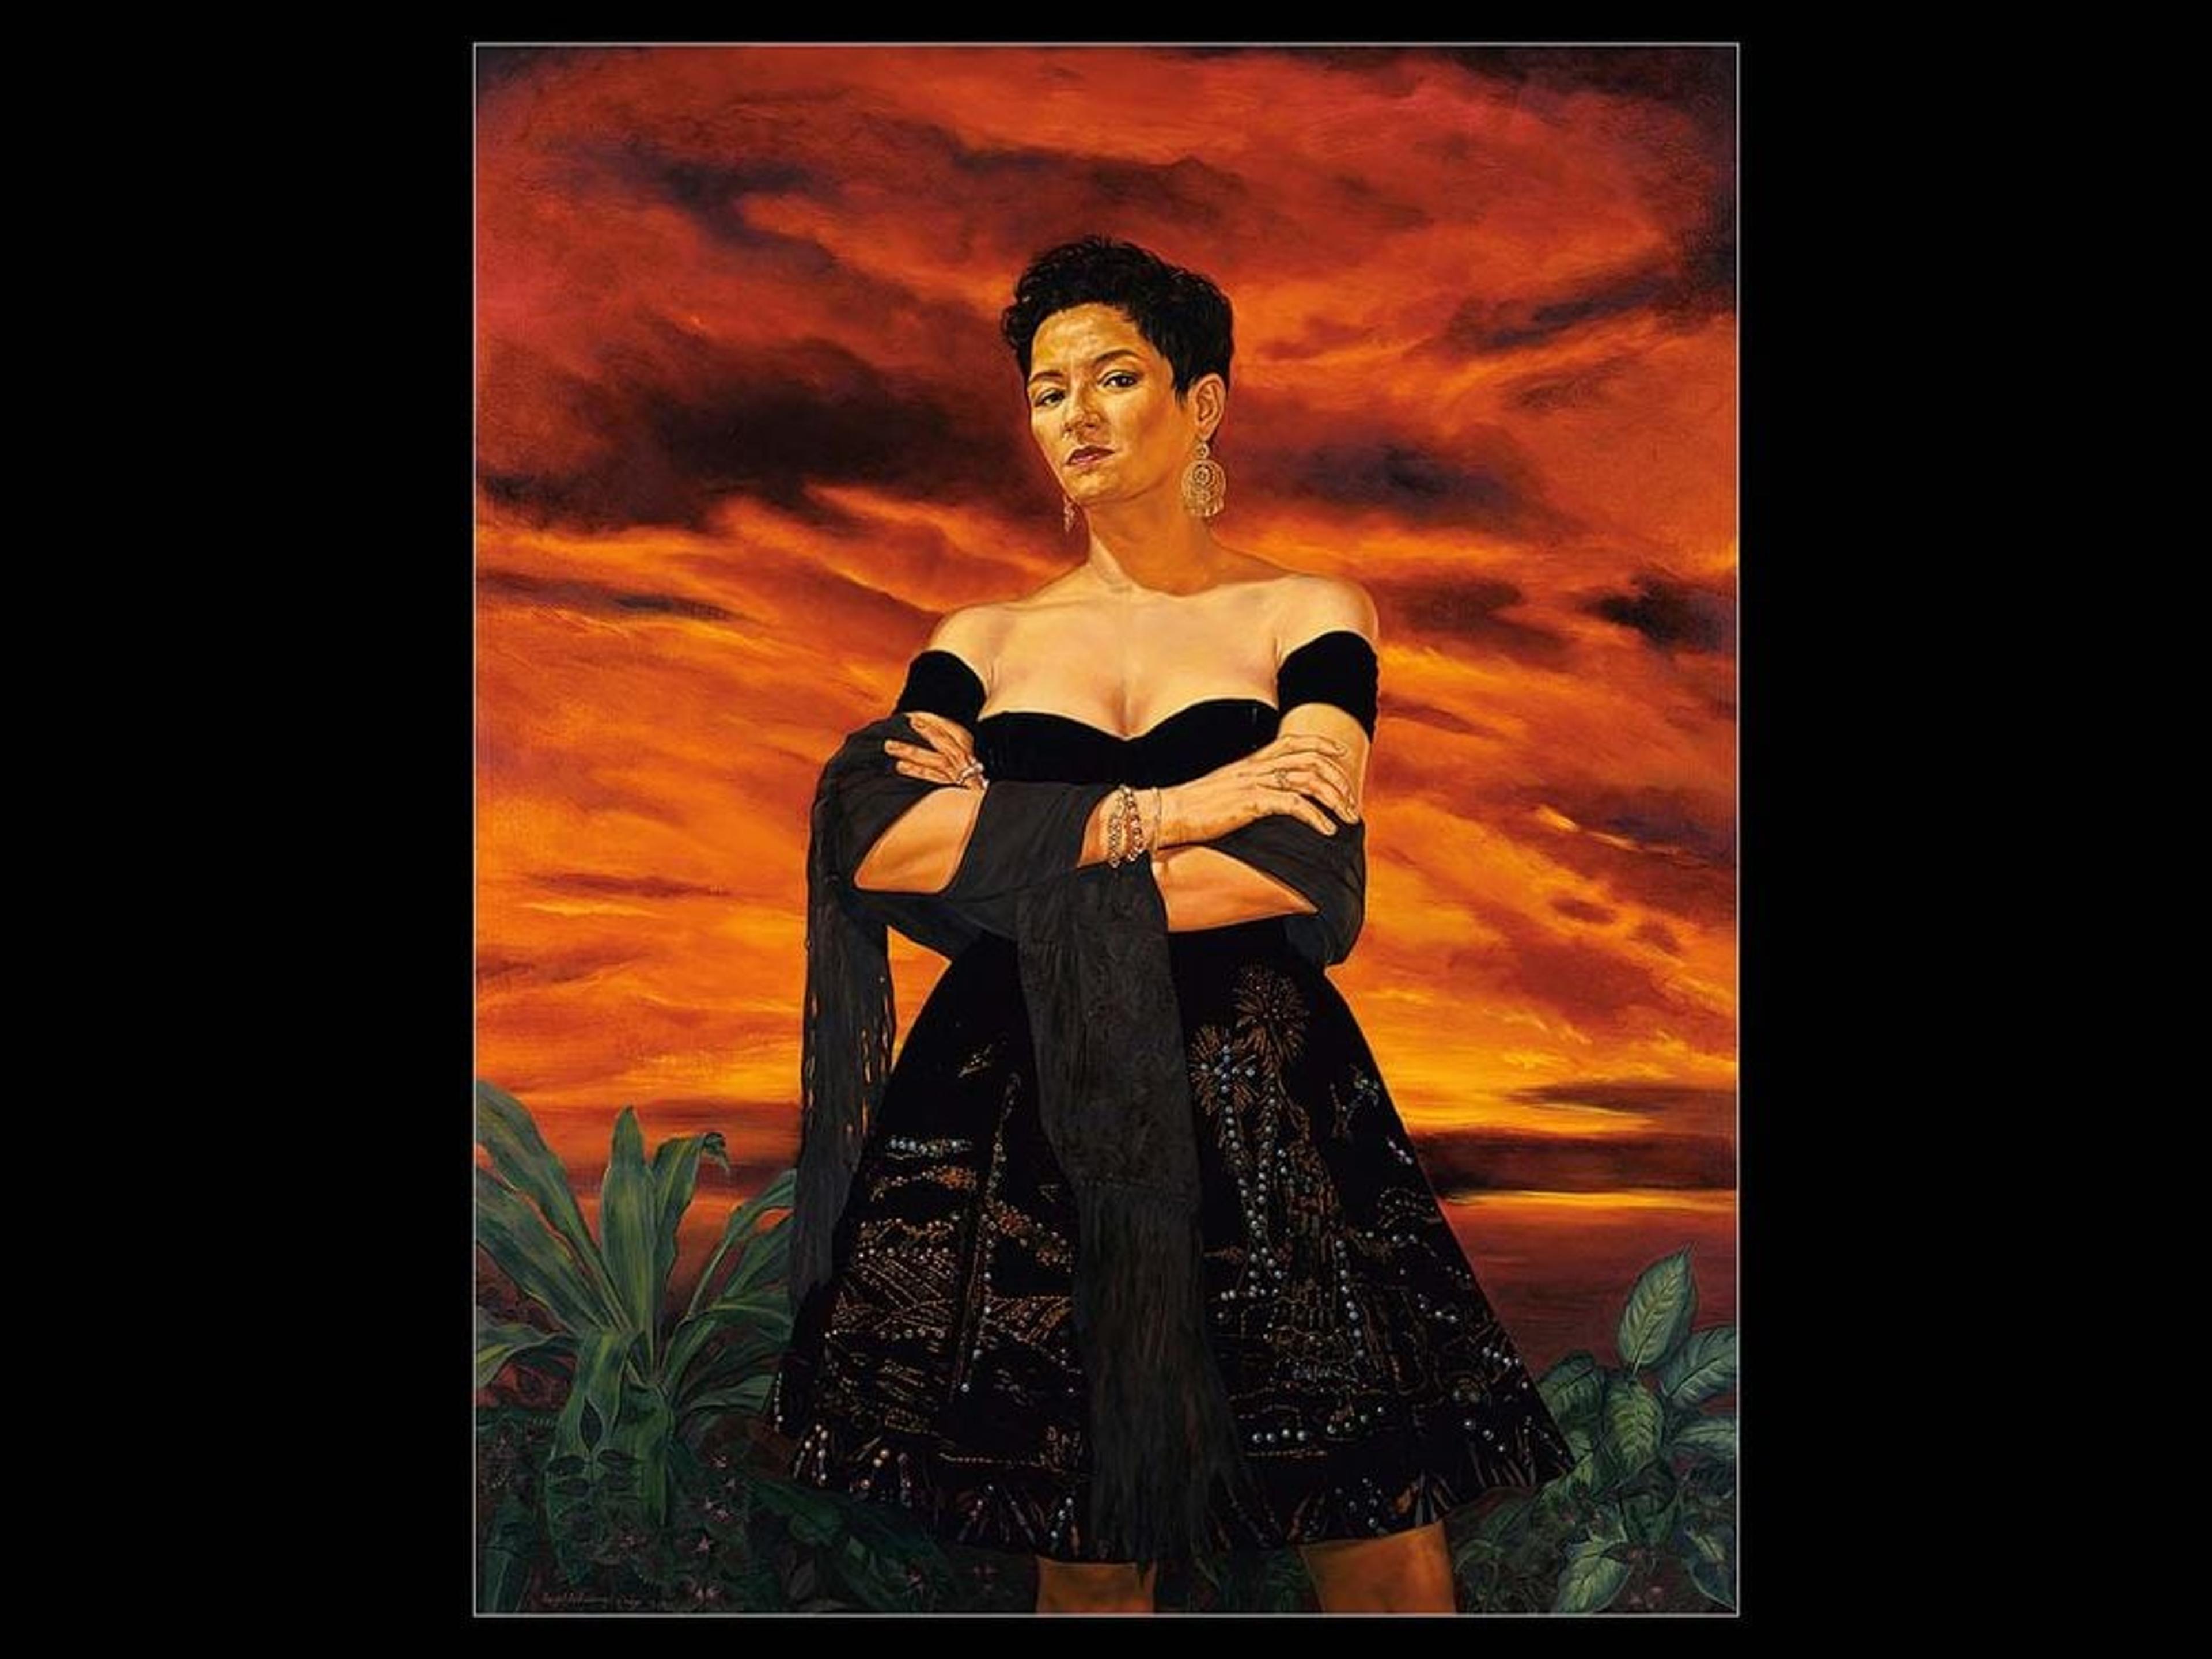 Latina author Sandra Cisneros is the subject of Angel Rodríguez-Díaz’s 1993 oil painting The Protagonist of an Endless Story.